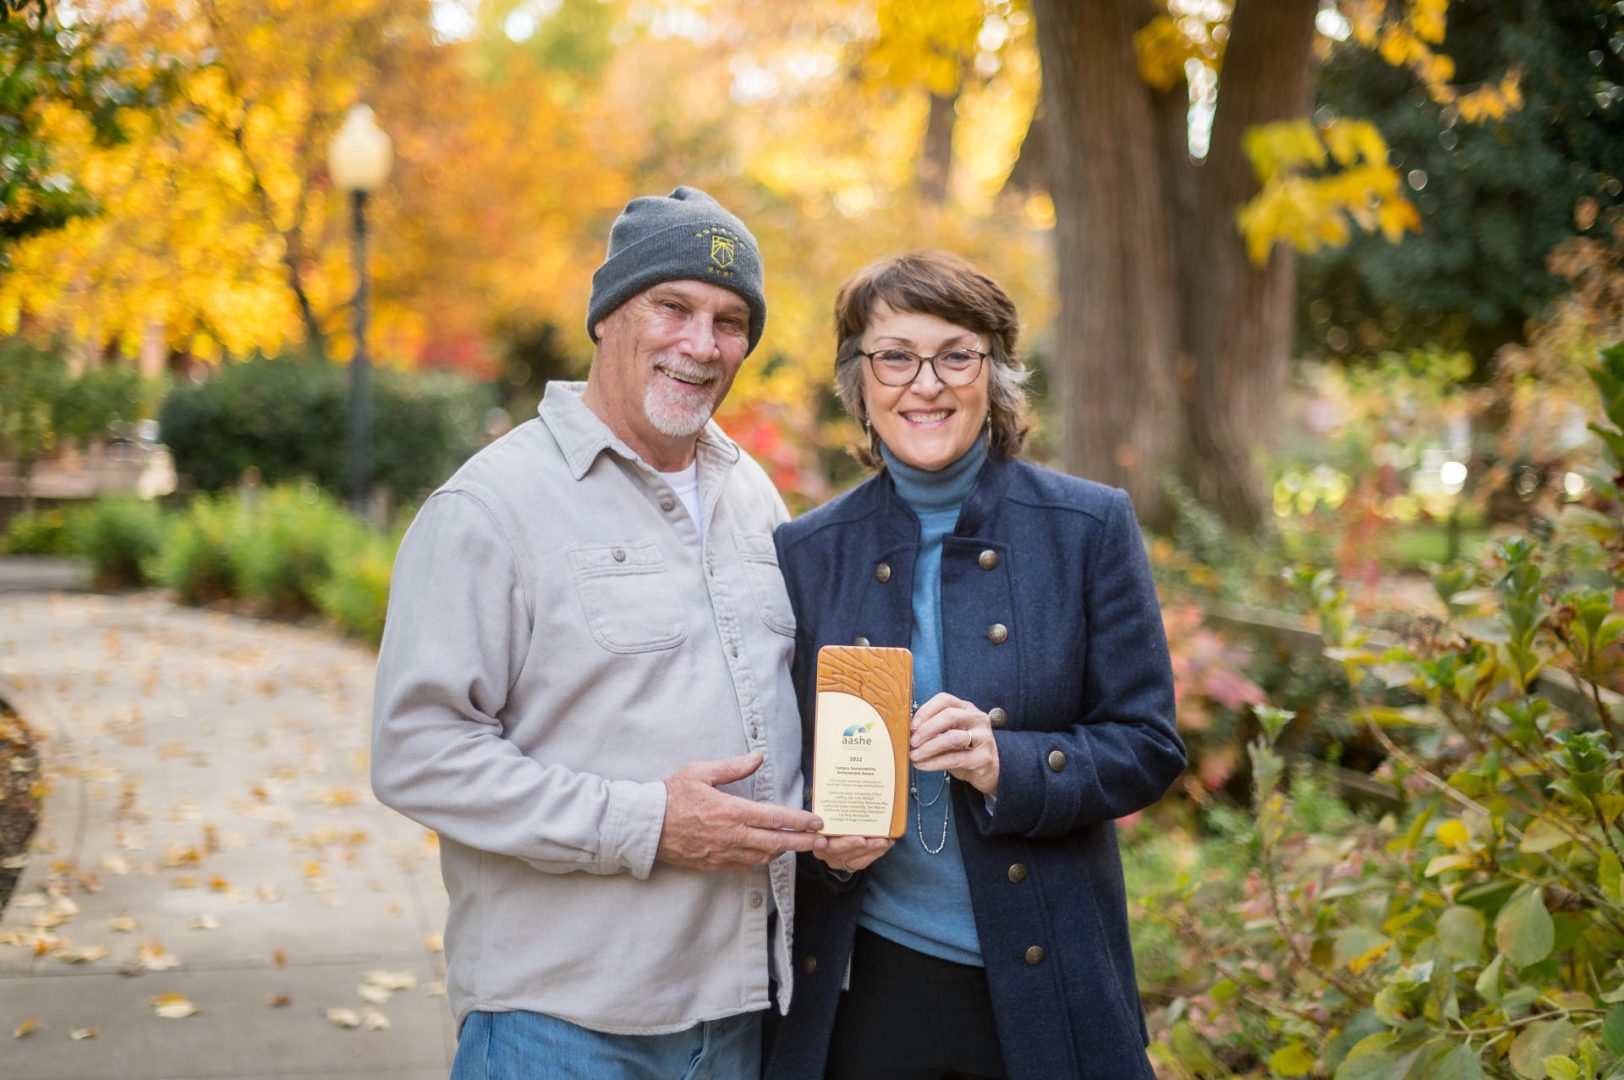 Mark Stemen (left) and former President Gayle Hutchinson pose for a photo as he hands her the Advancement of Sustainability in Higher Education (AASHE) Campus Sustainability Achievement Award.